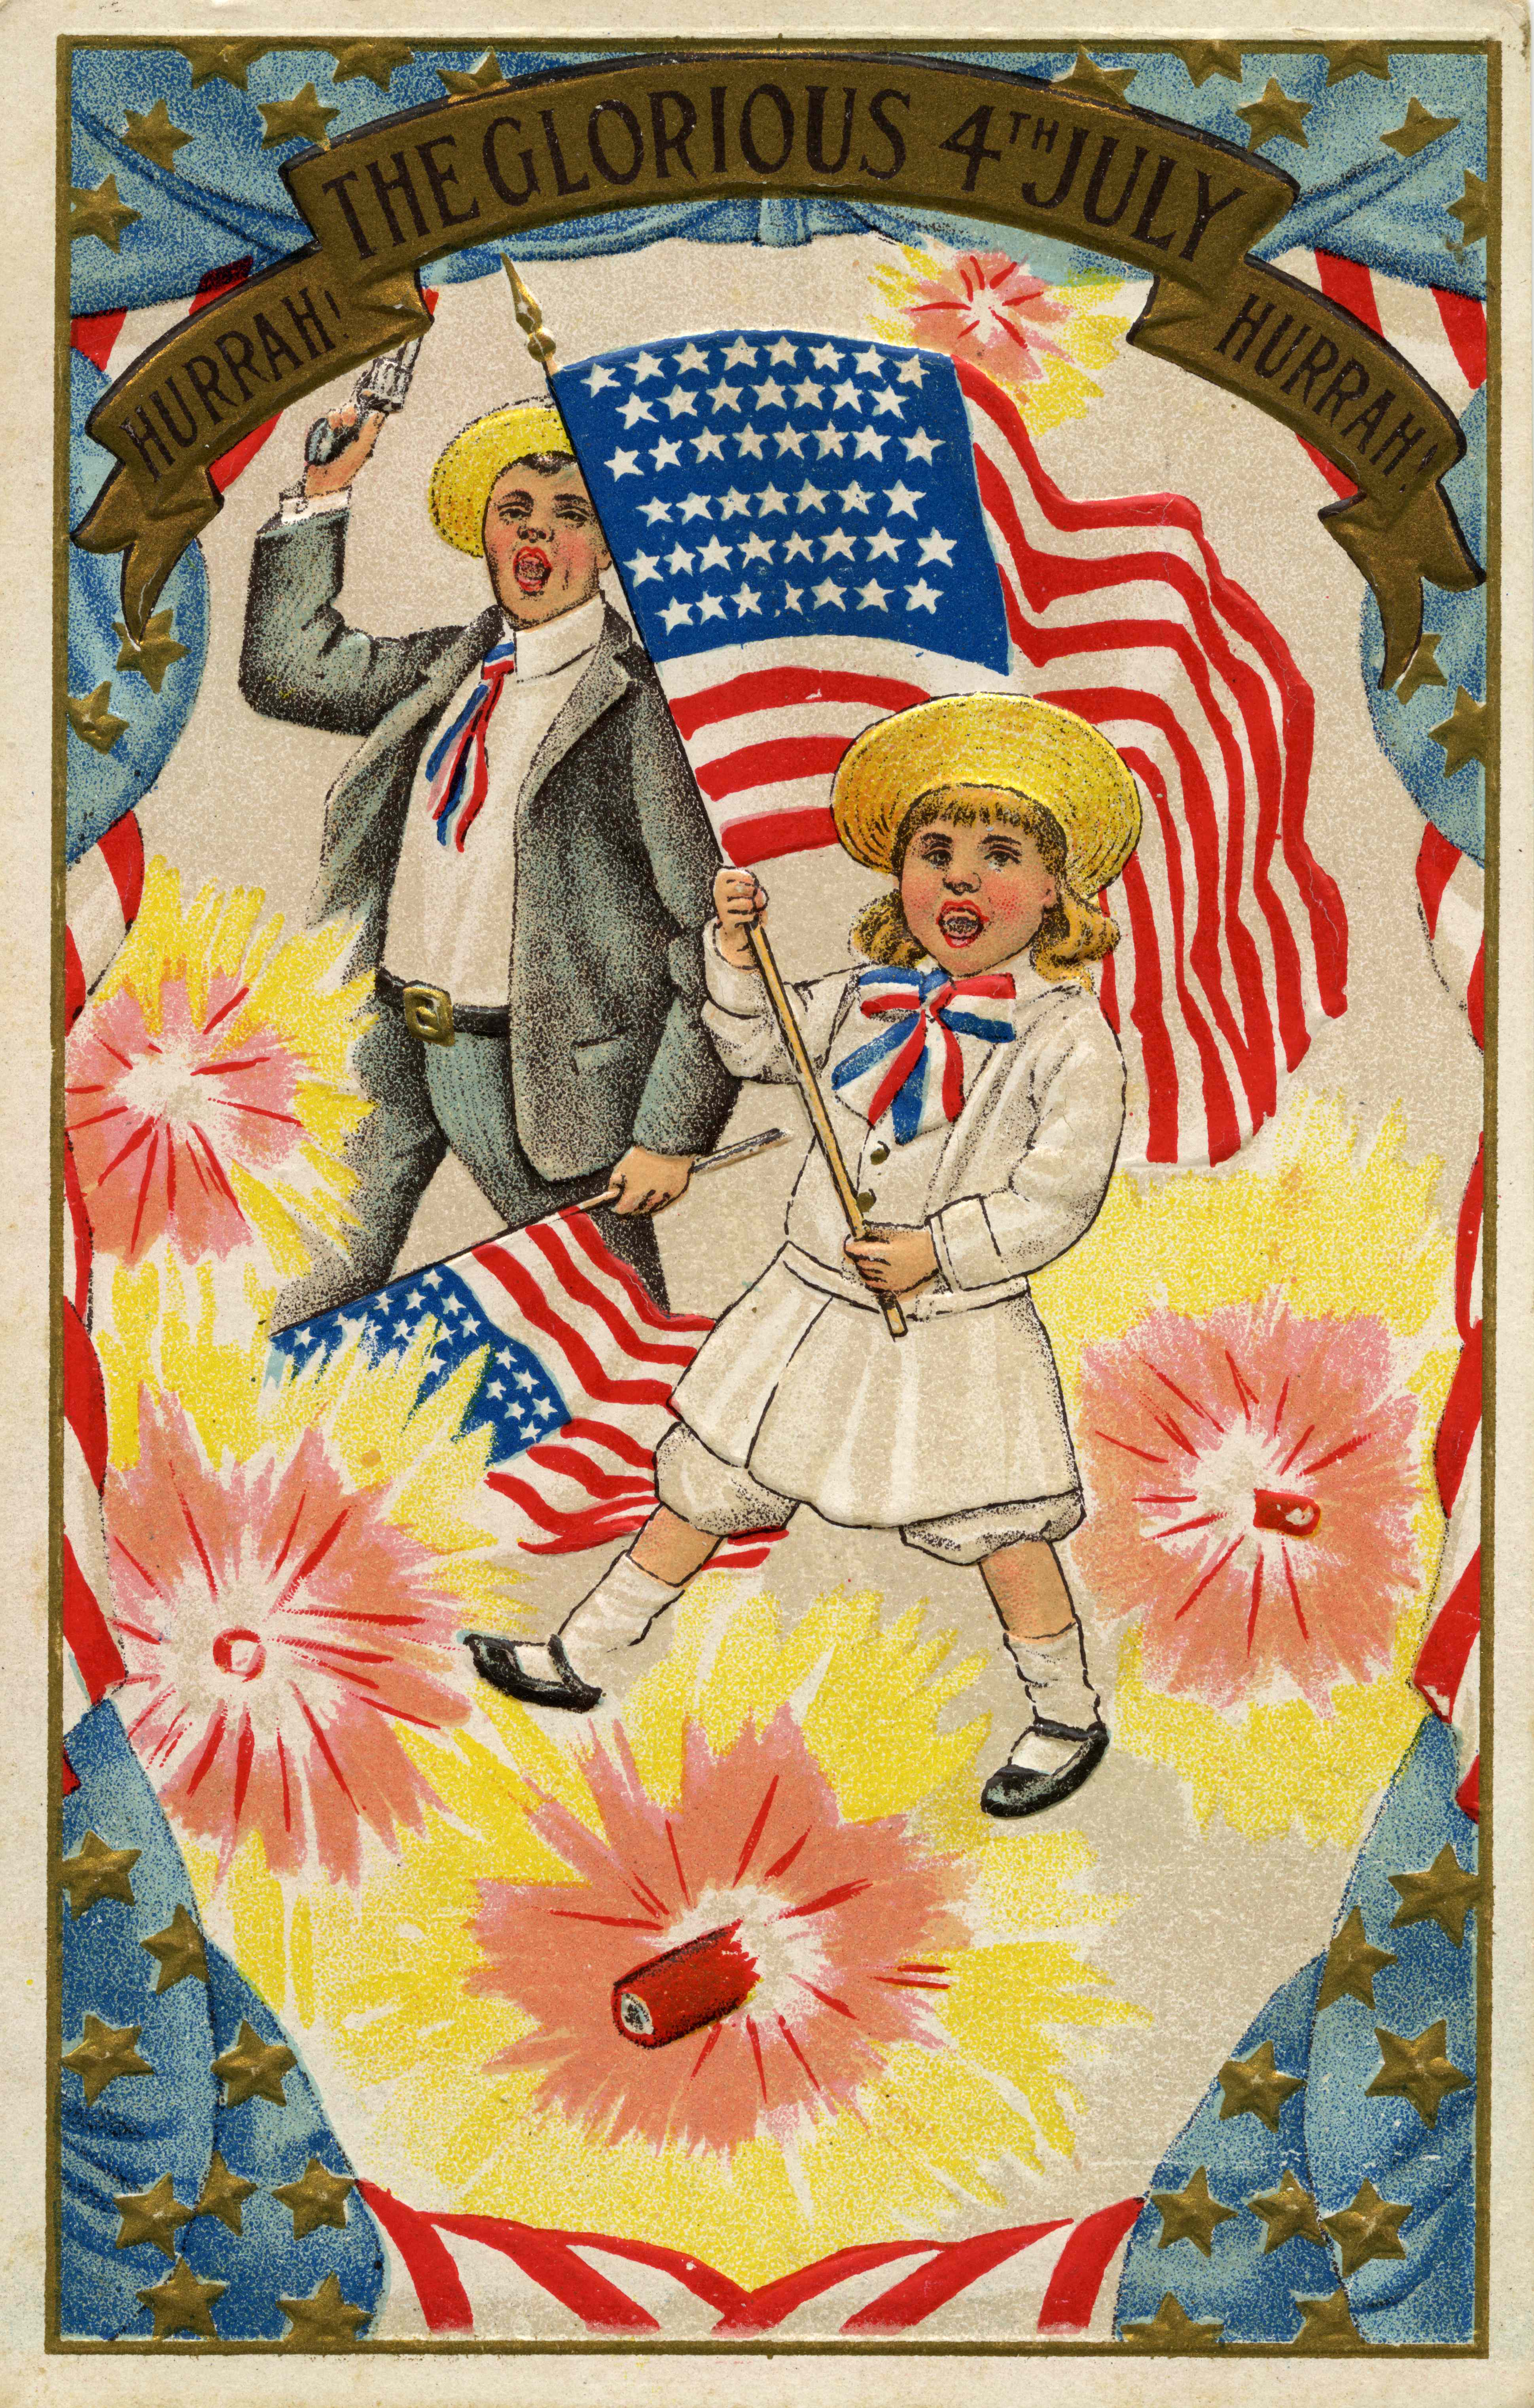 Postcard featuring two yelling children with flags and a gun and fireworks exploding behind them.